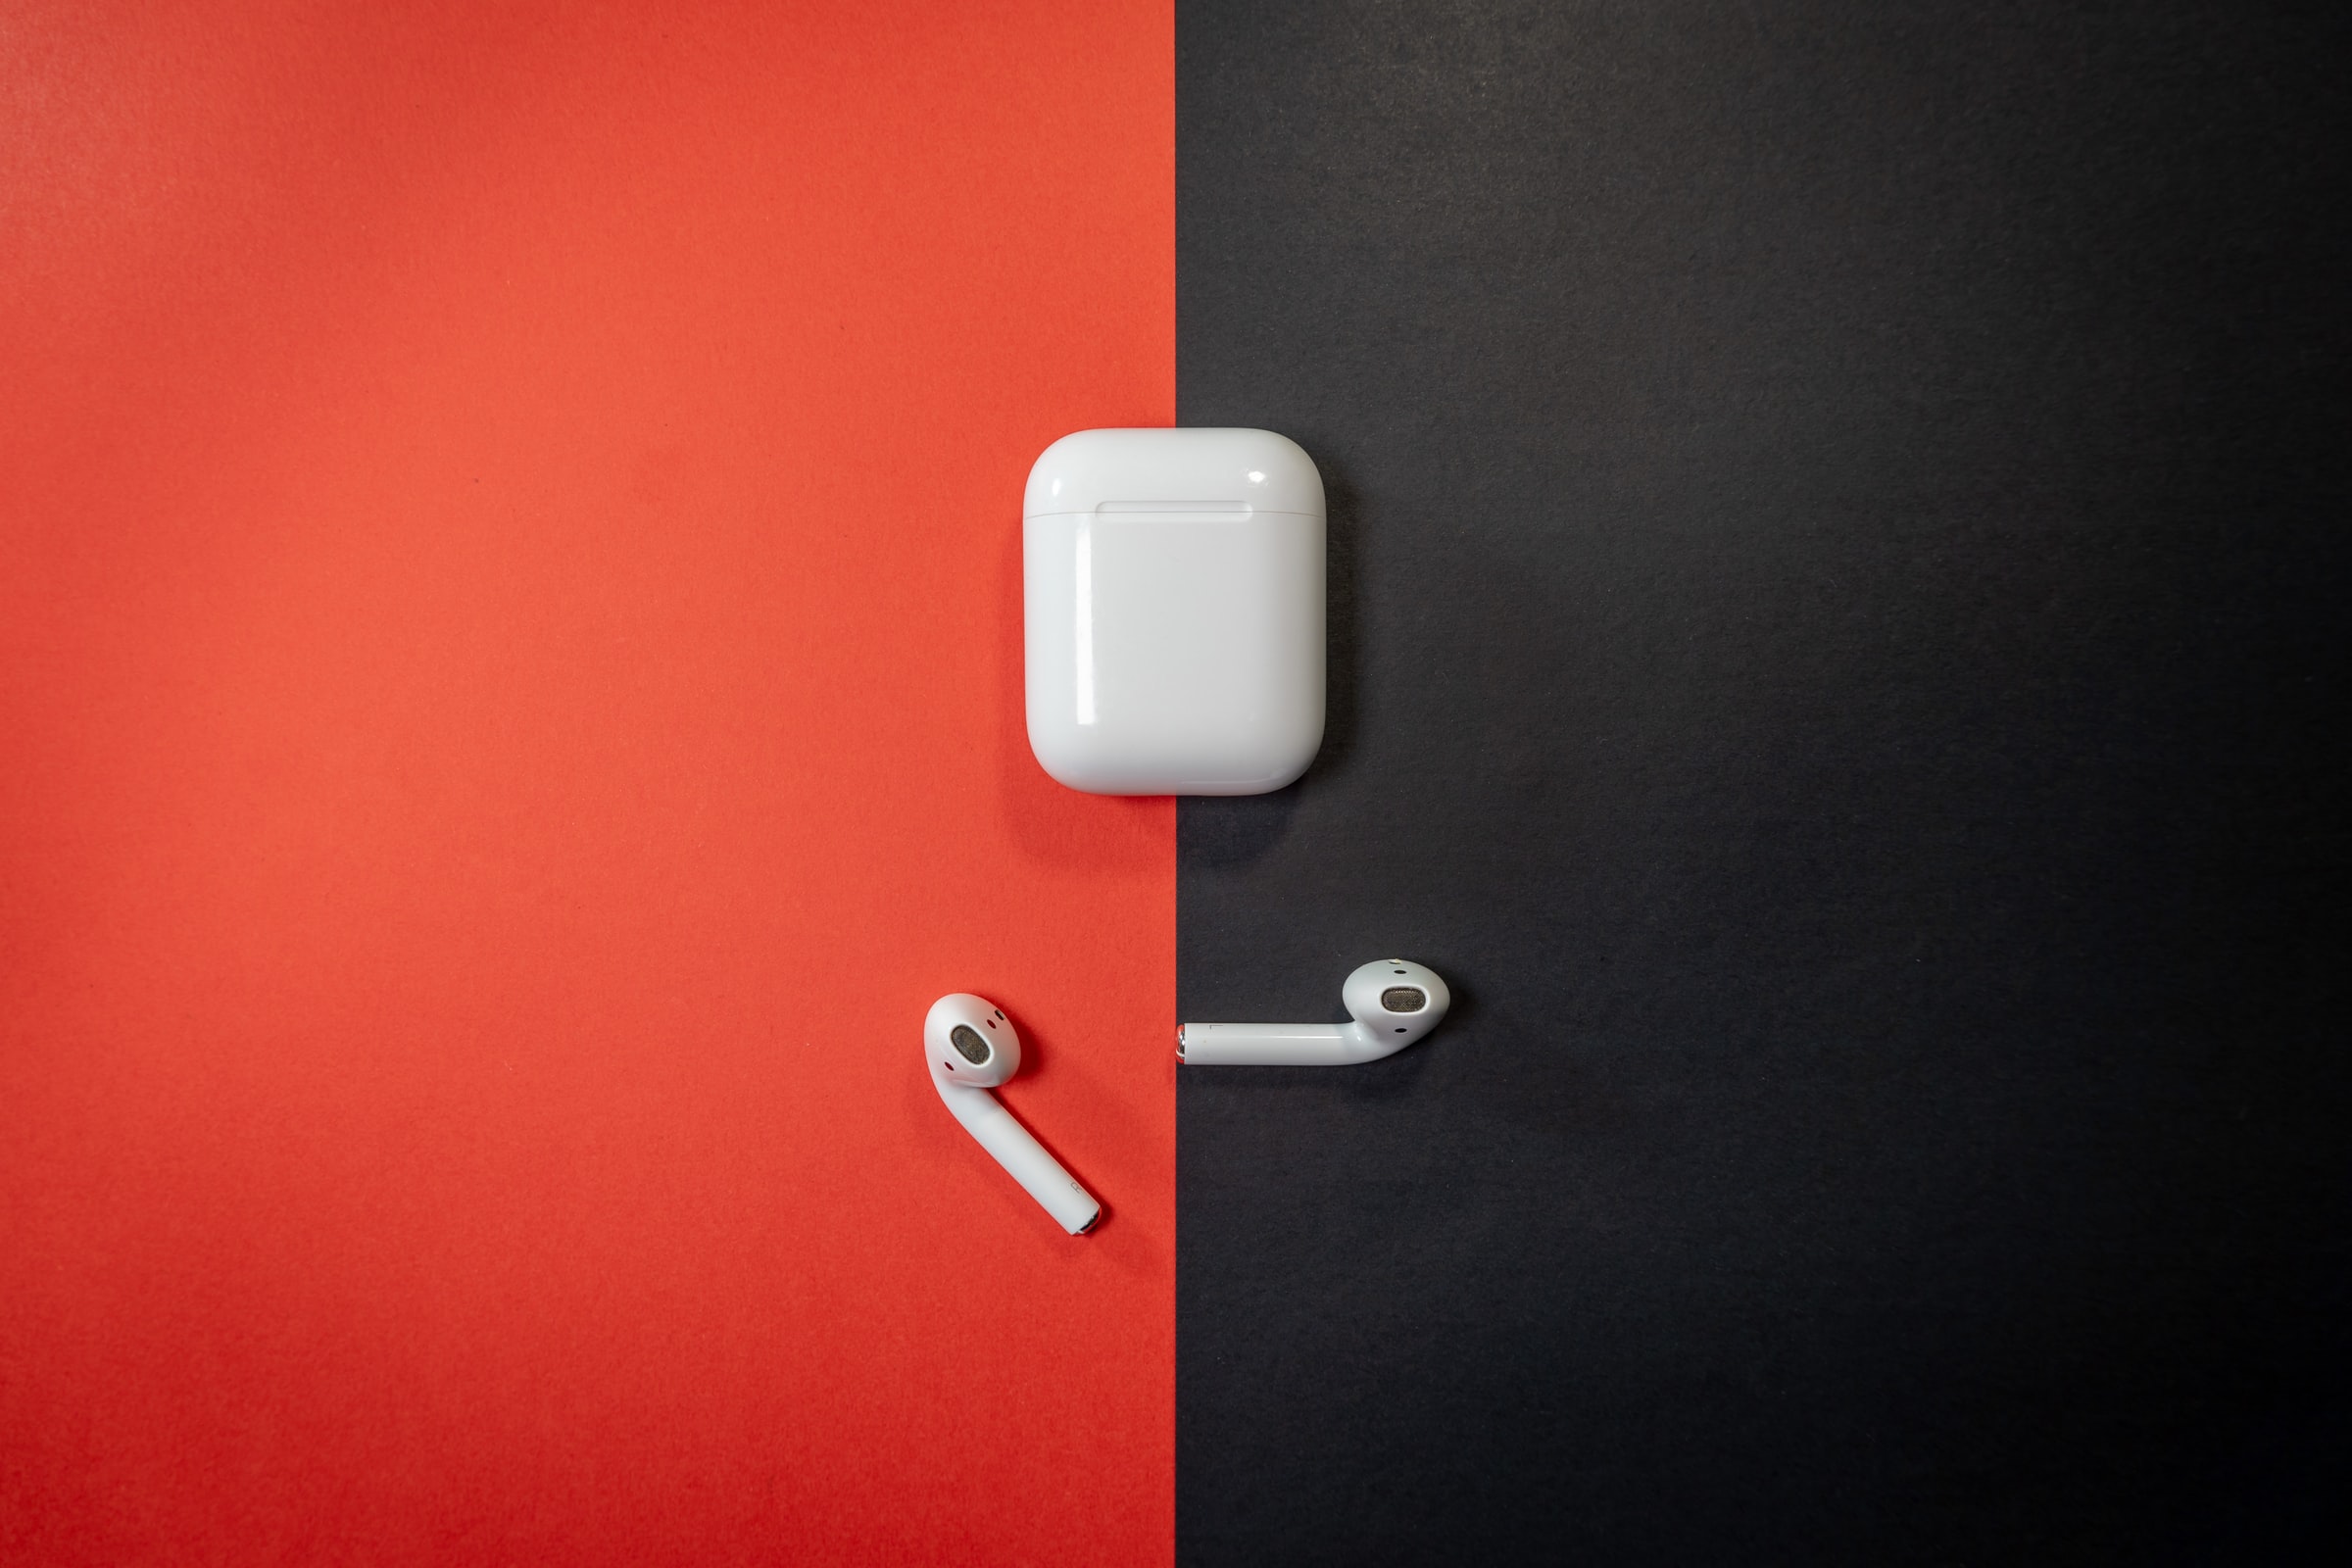 How To Make Your Airpods Louder - Solve Volume Errors